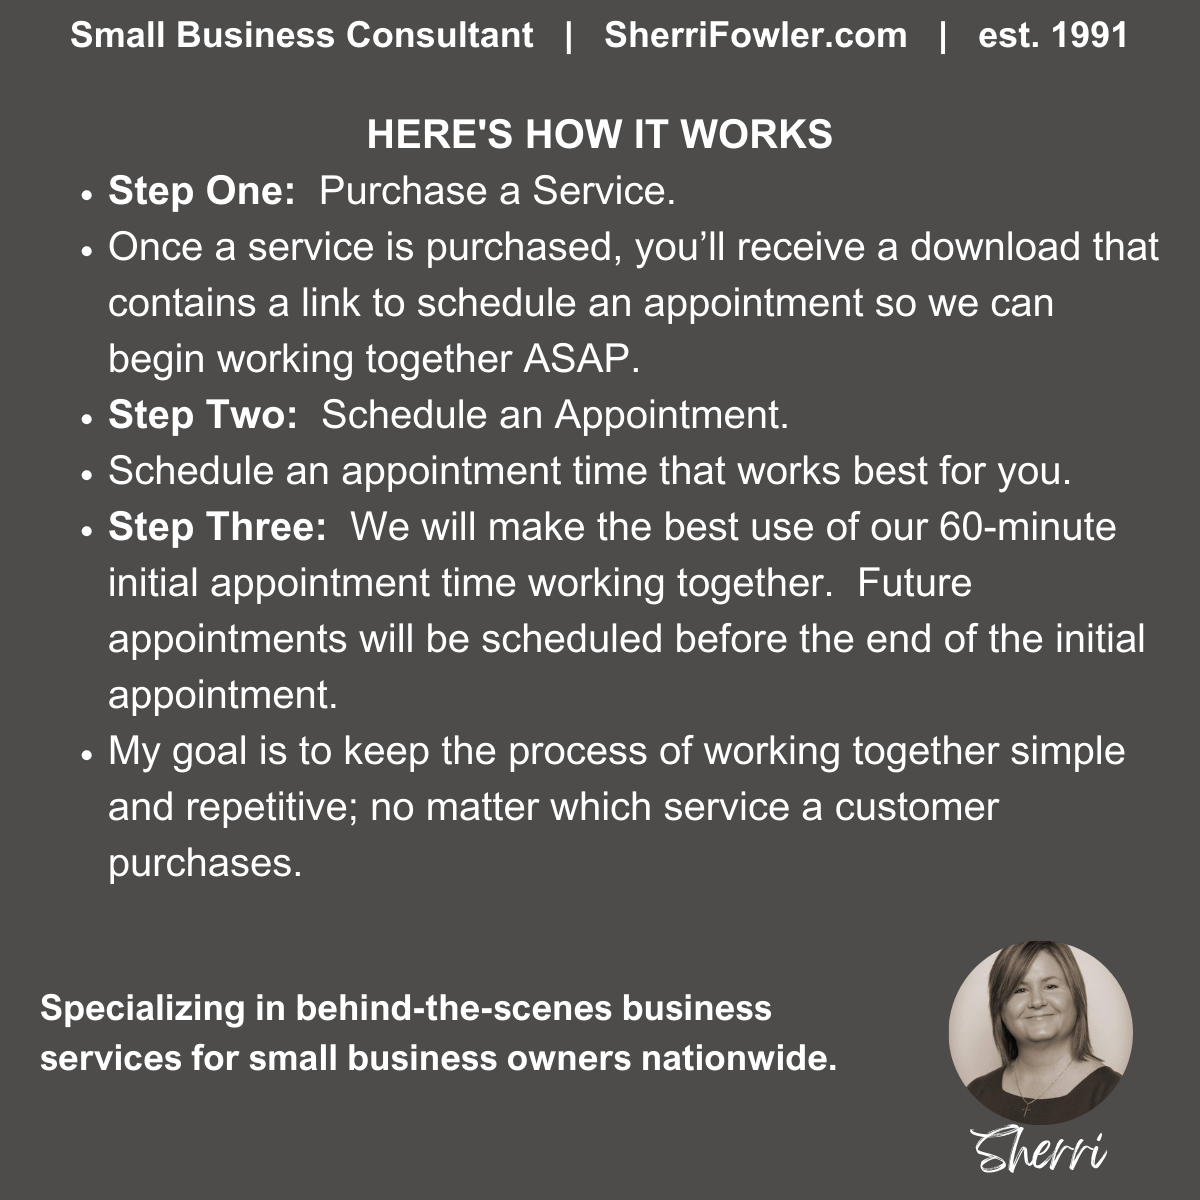 Sherri Smith creates templates for small business owners, genealogy enthusiasts, and individuals. shop sherrifowler.com